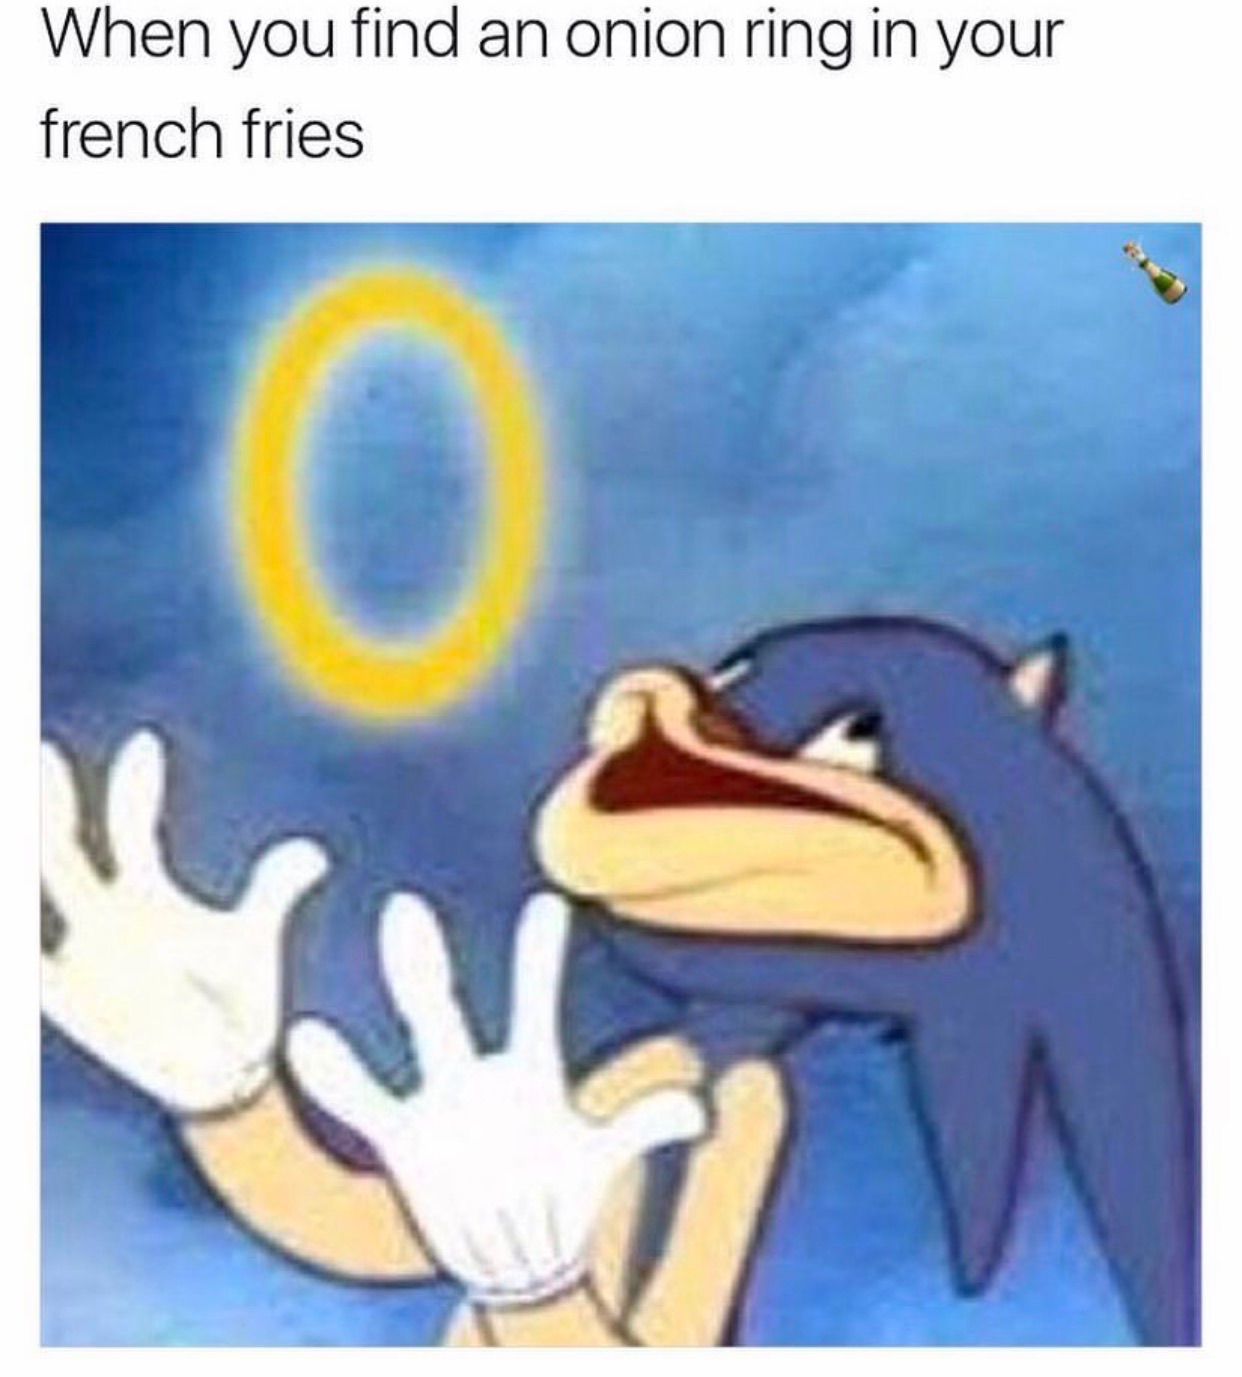 memes - you find an onion ring in your french fries - When you find an onion ring in your french fries